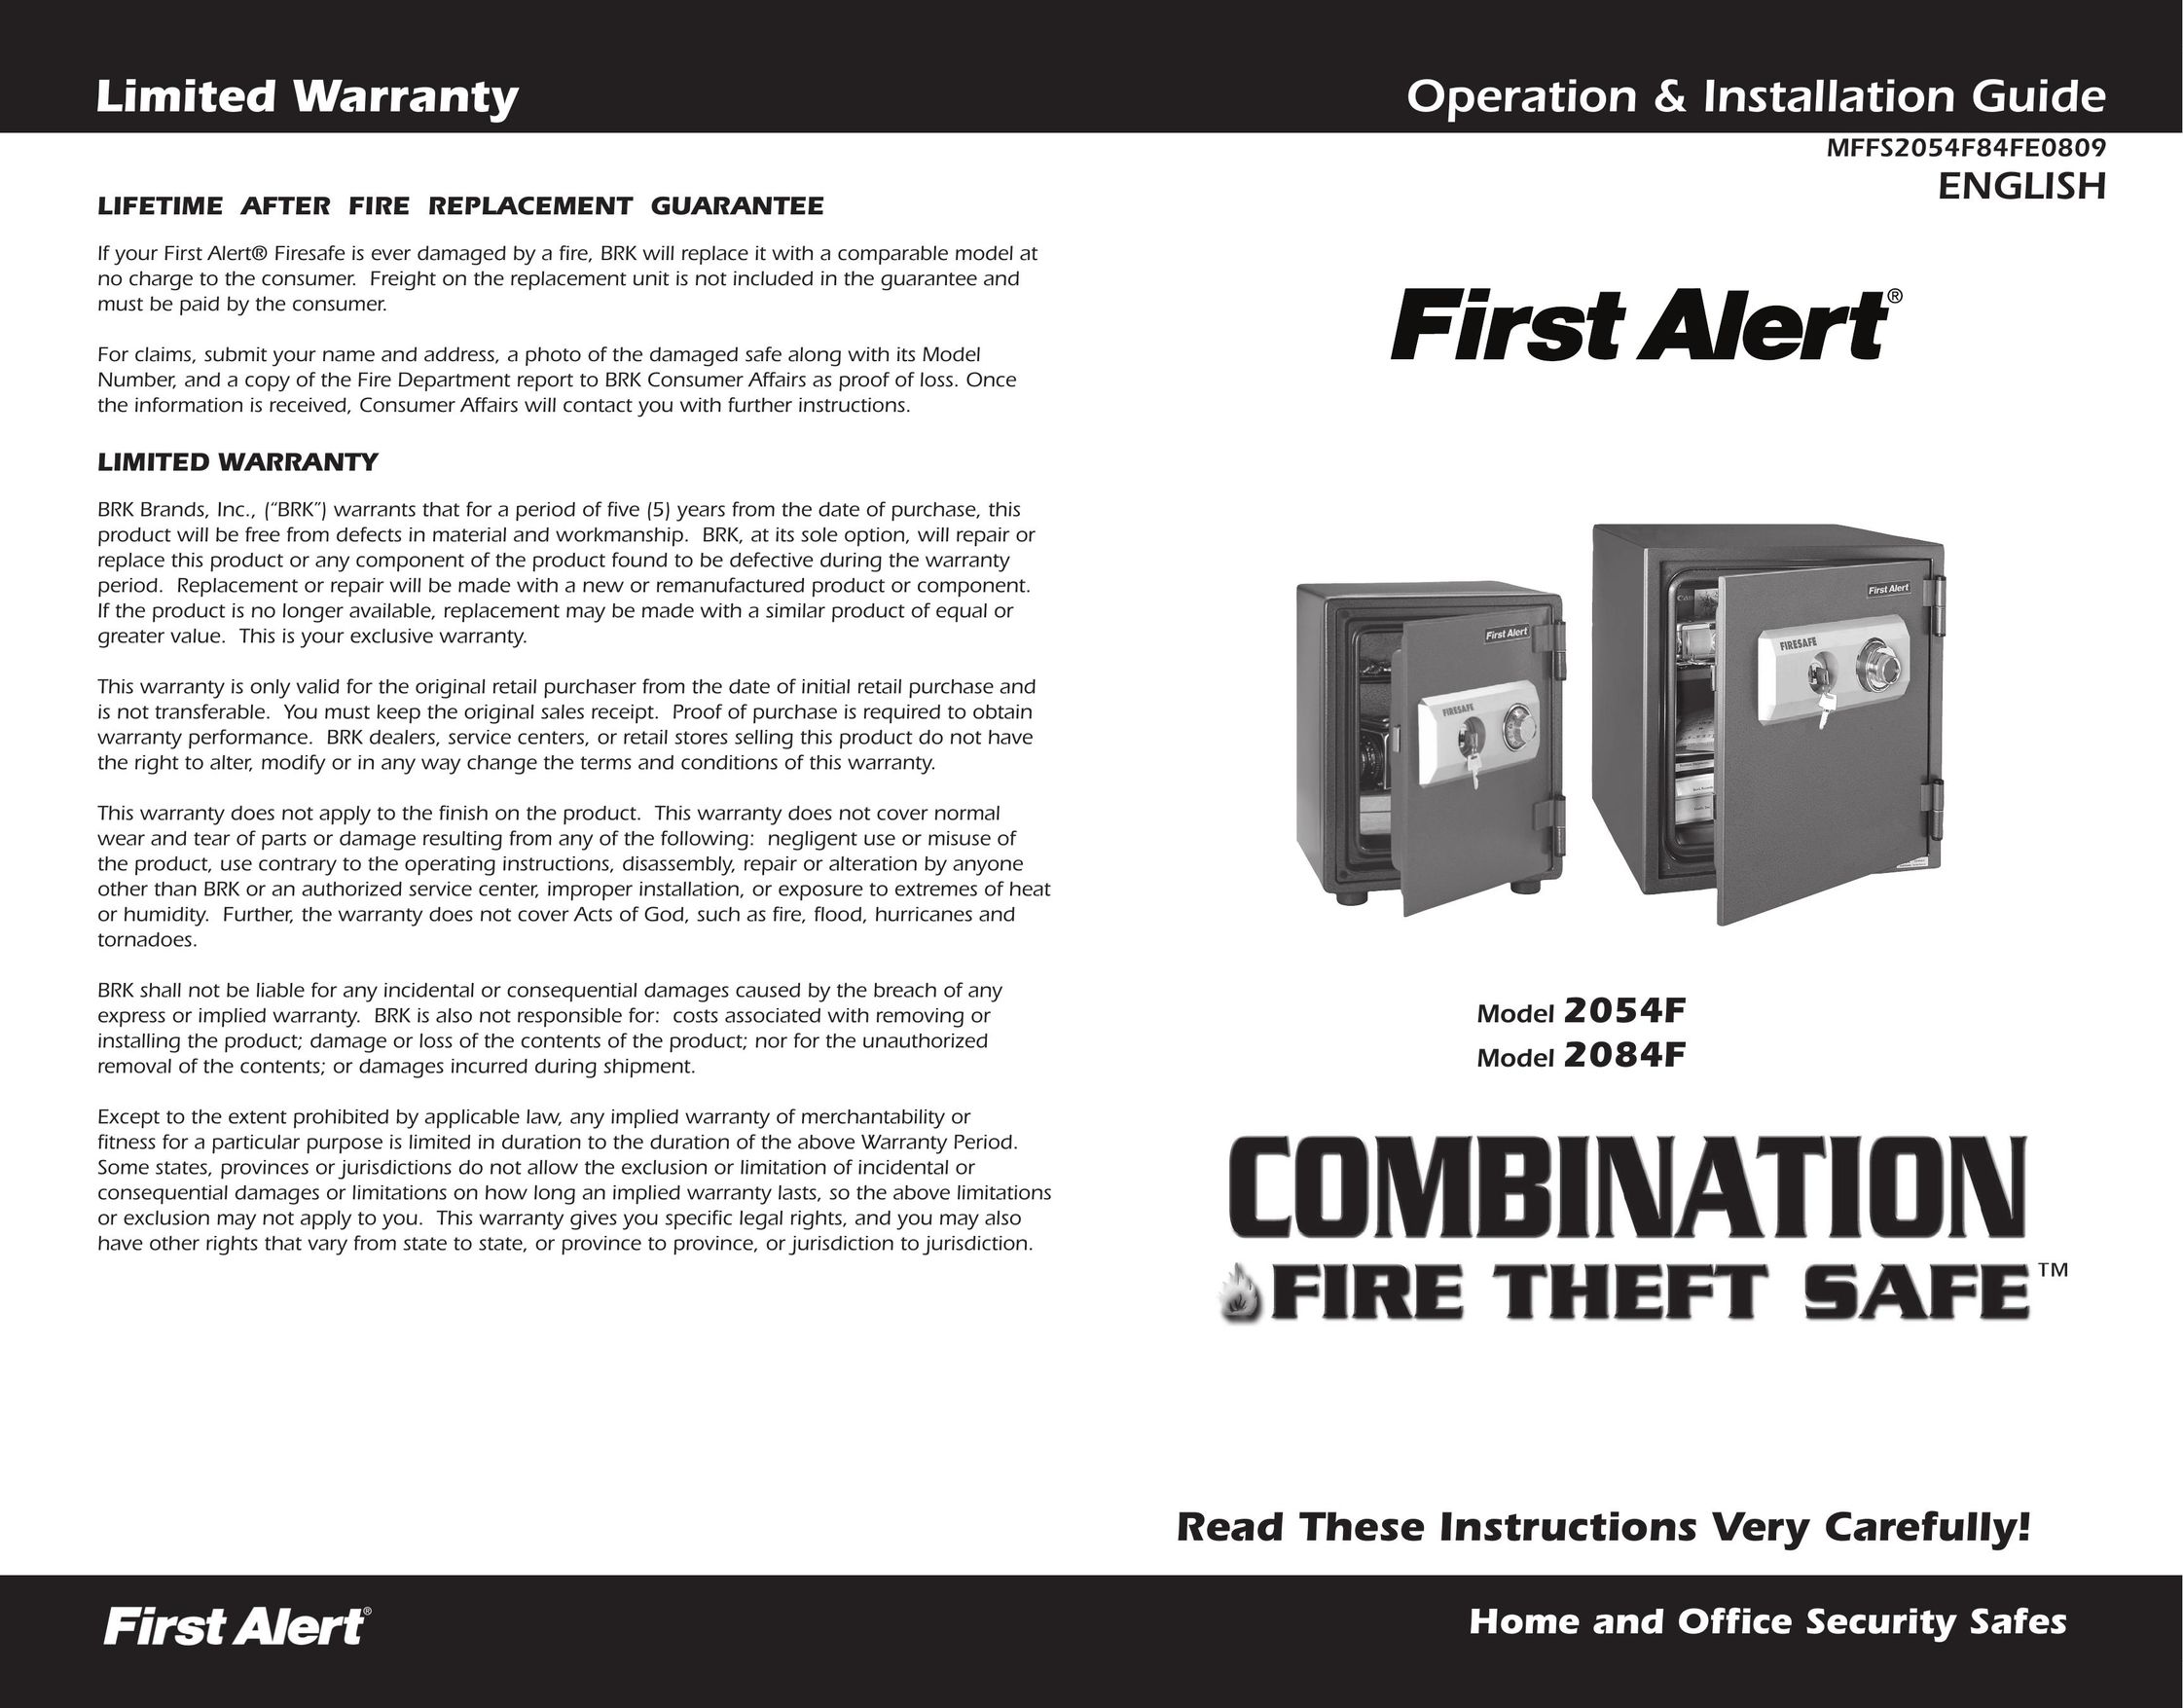 First Alert 2054F Home Safety Product User Manual